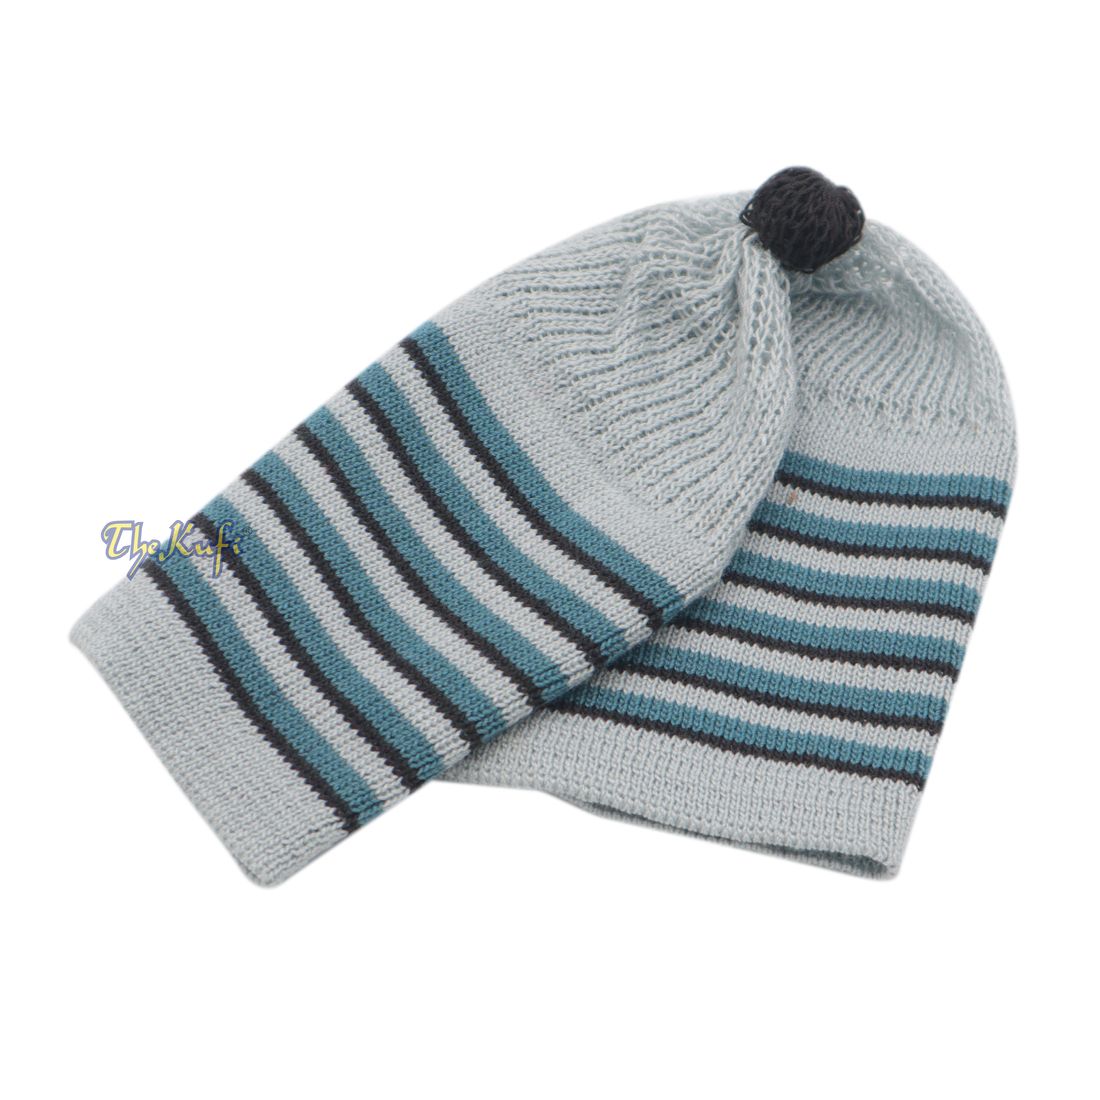 Light Grey with Turquoise and Black Lines Baby/Infant Kufi Pompom Beanie